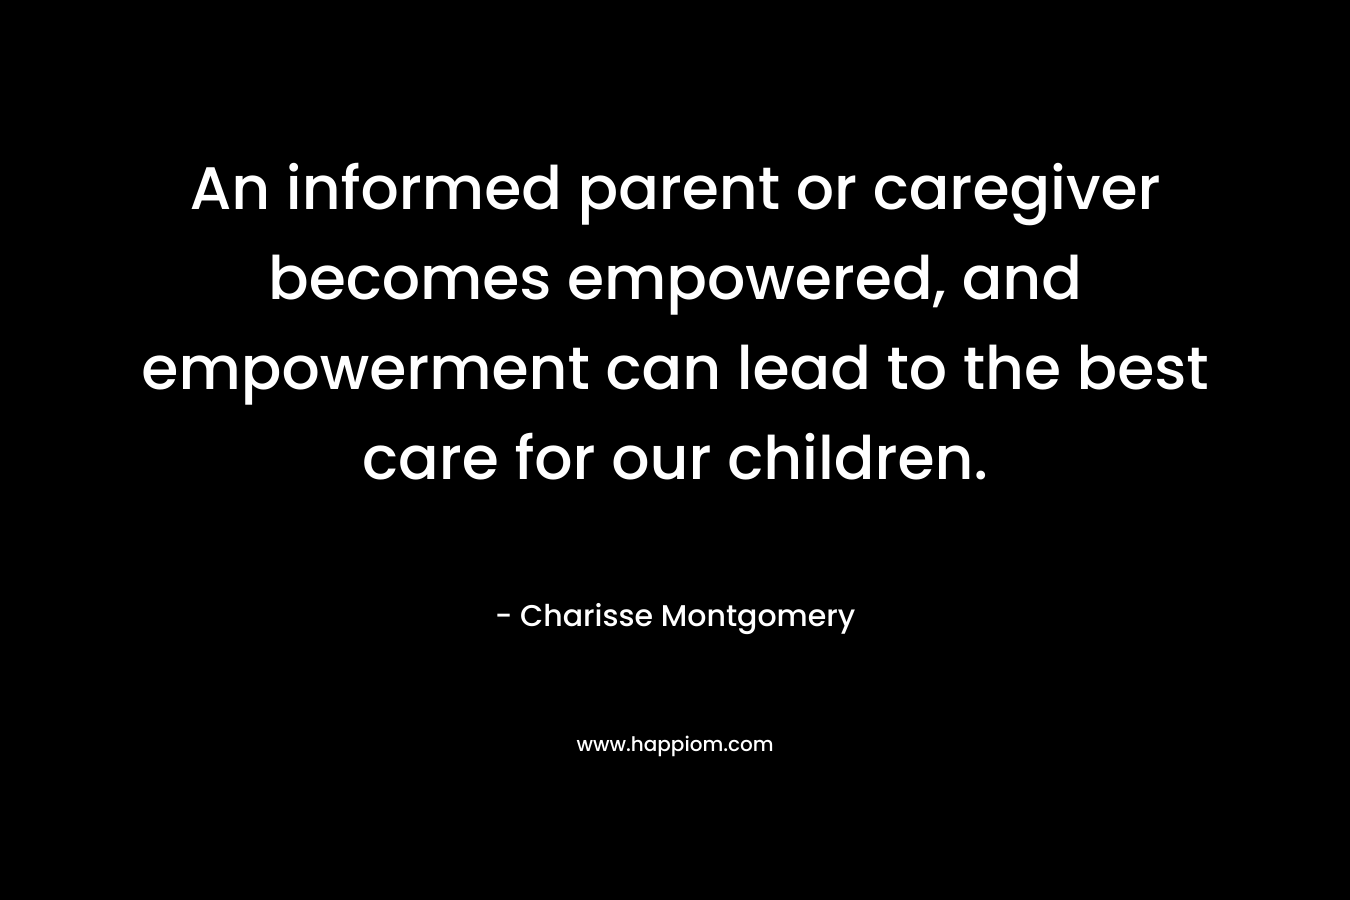 An informed parent or caregiver becomes empowered, and empowerment can lead to the best care for our children. – Charisse Montgomery